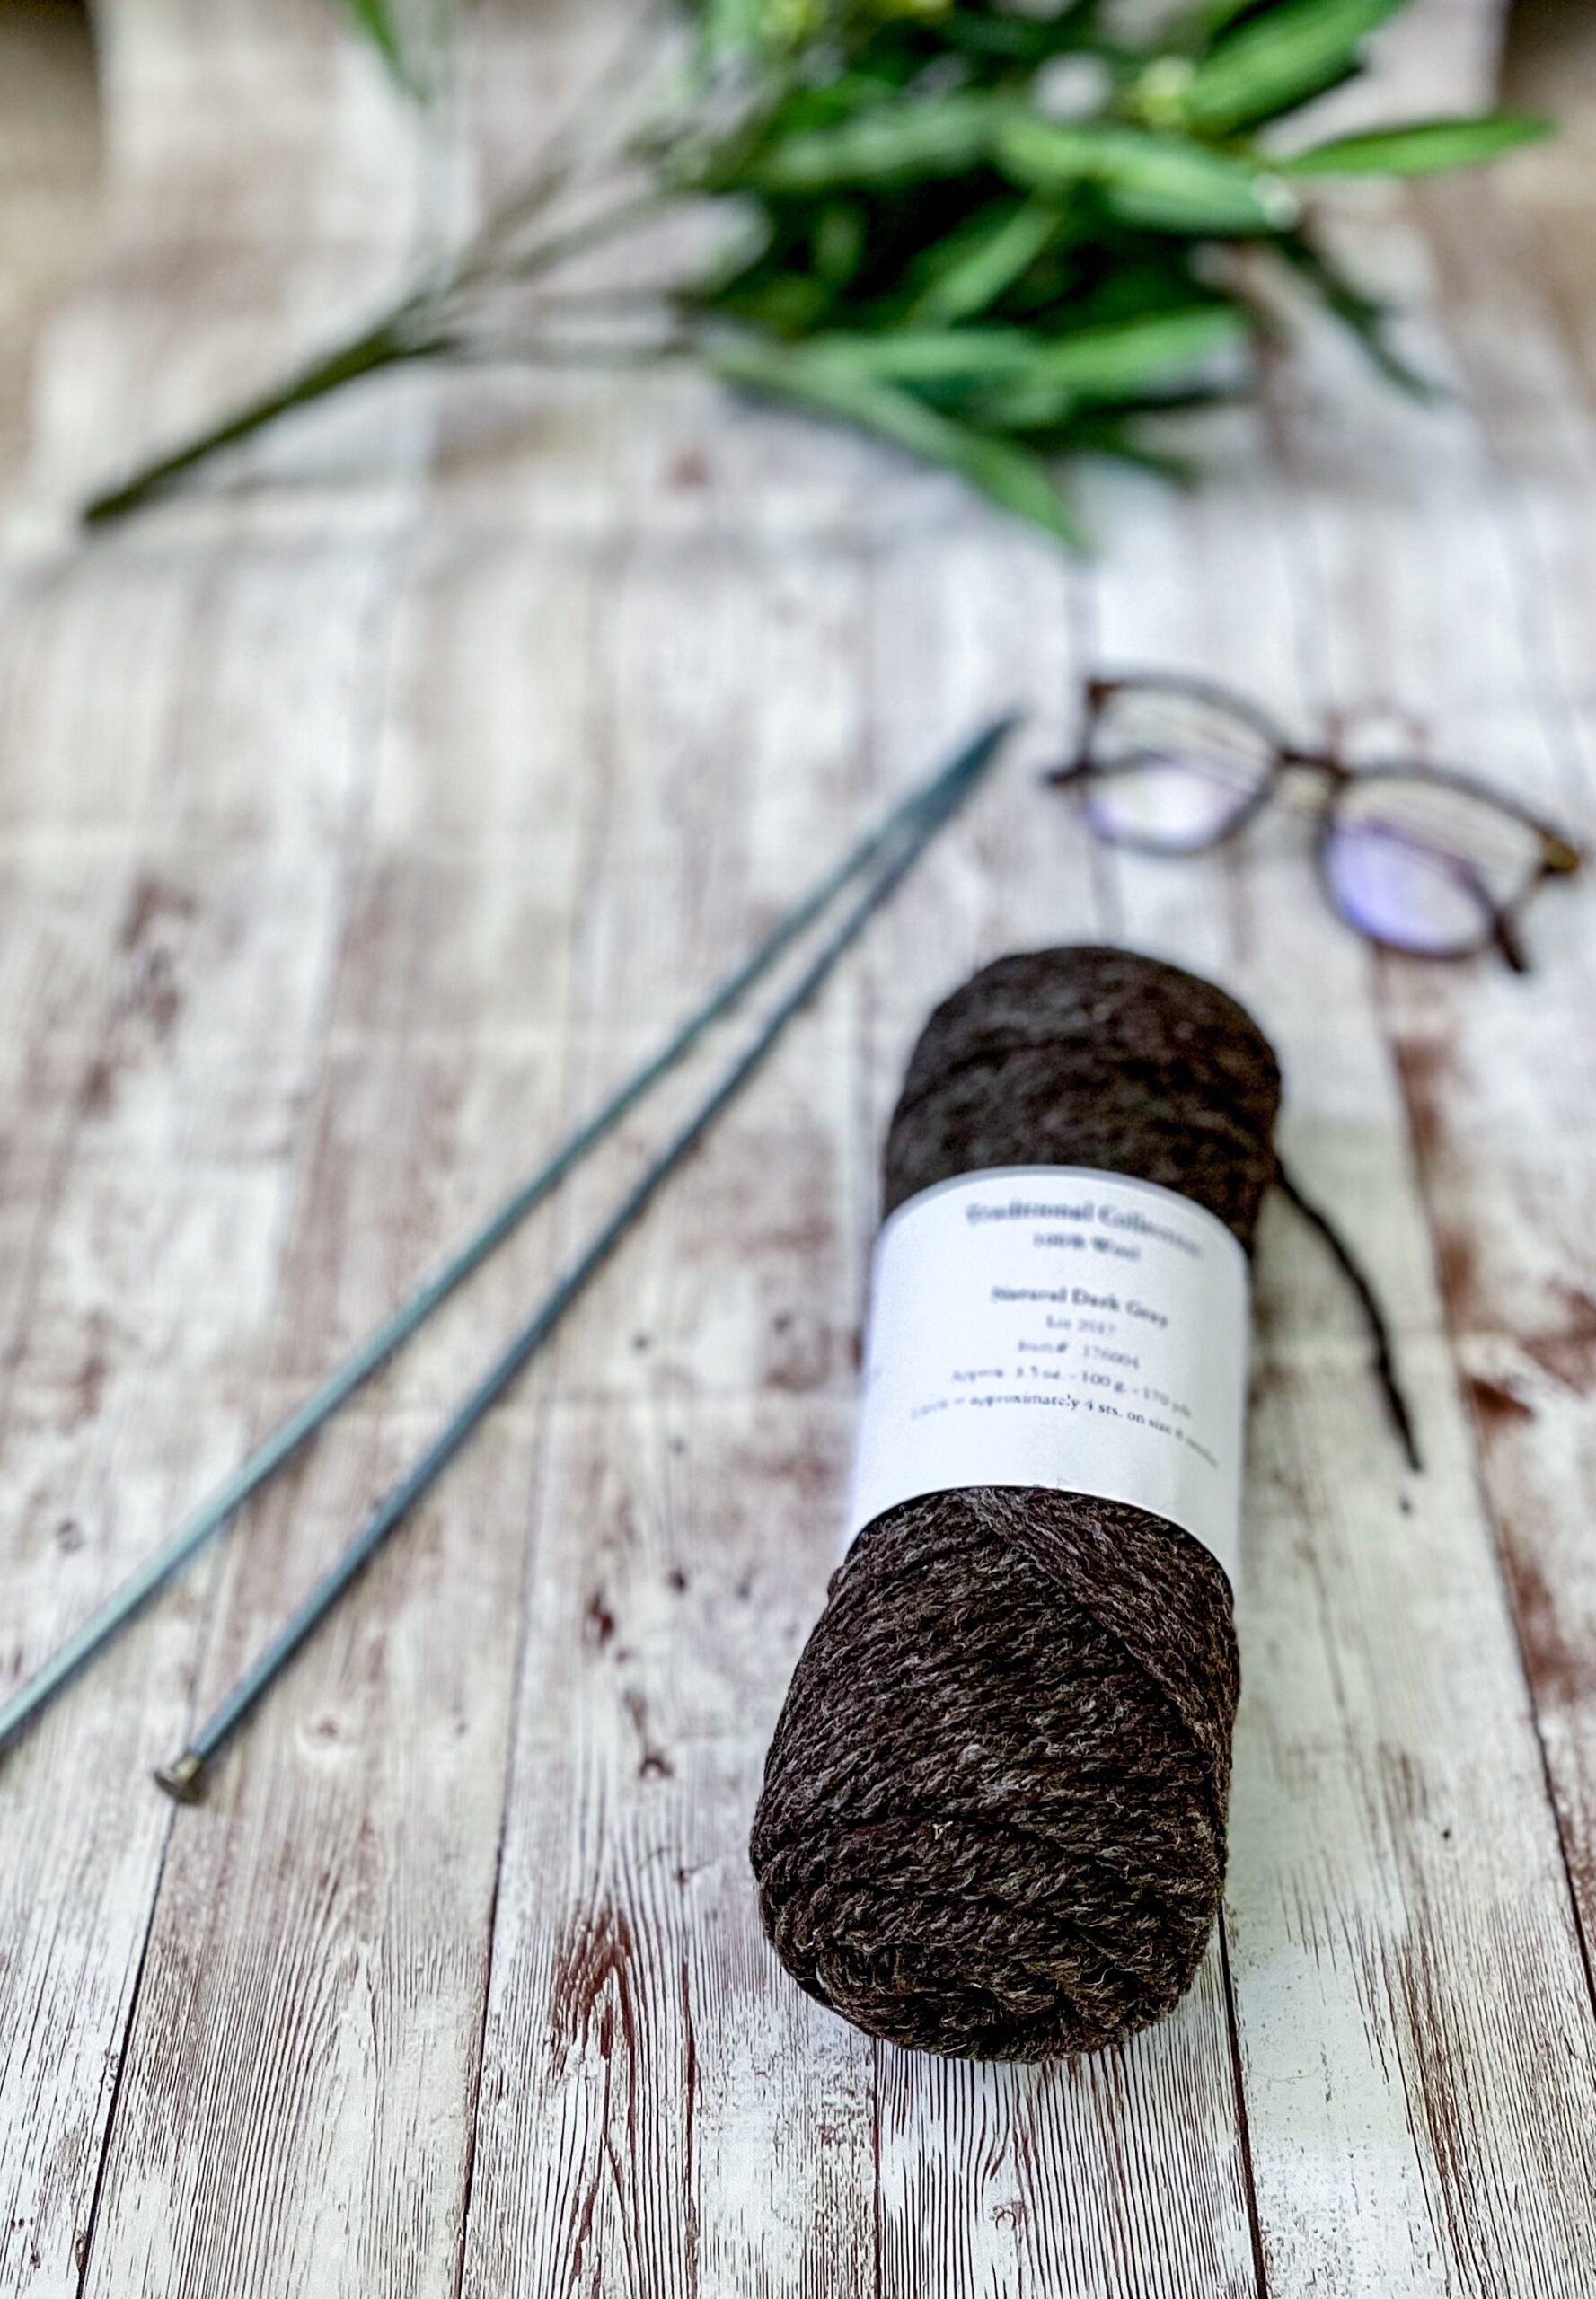 A natural dark gray skein of yarn rests on a wood plank, with a pair of knitting needles, reading glasses, and greenery around it